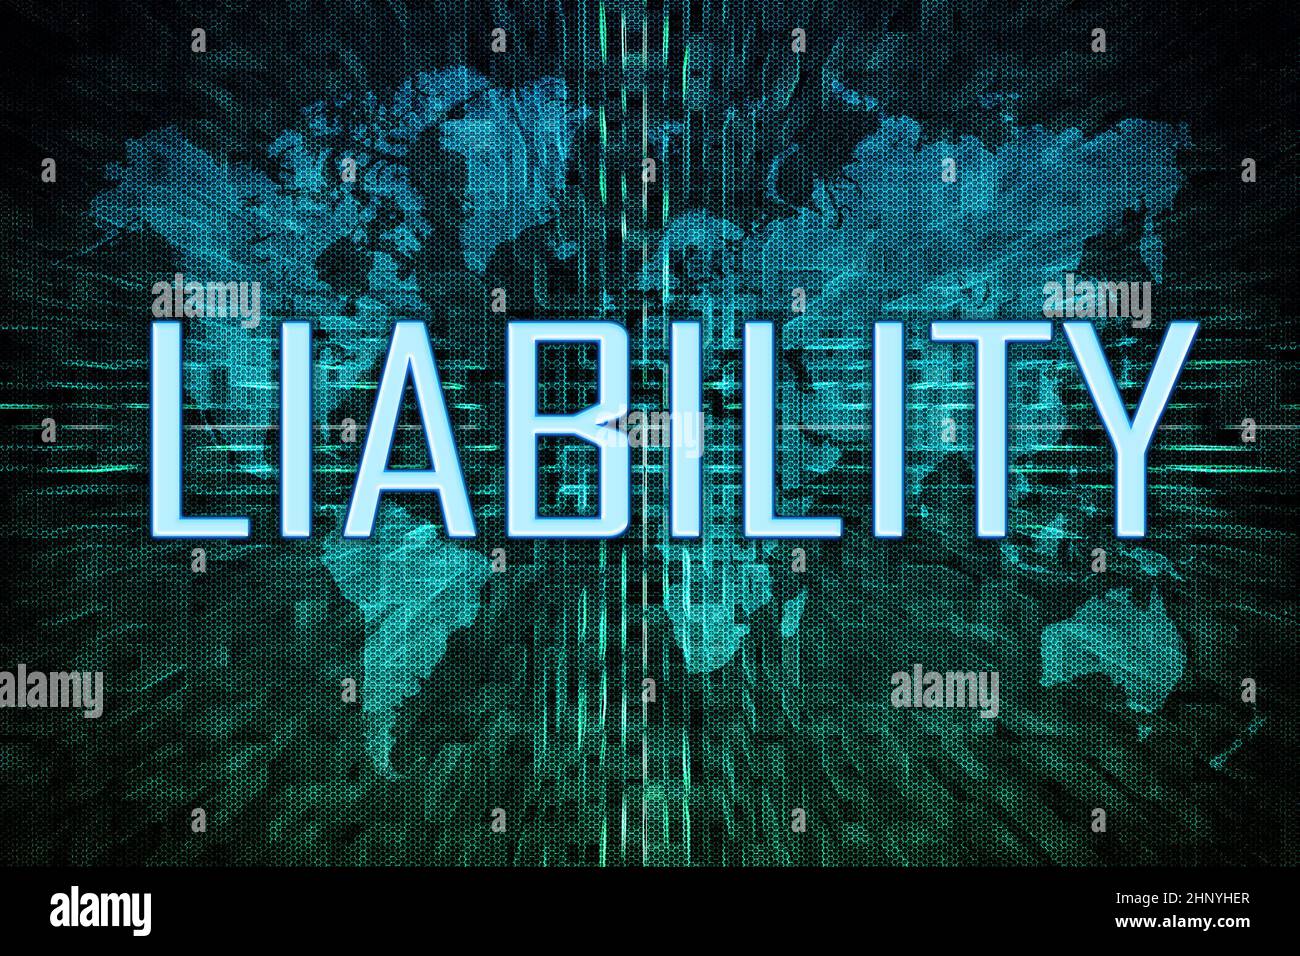 Liability - text concept on green digital world map background. Stock Photo